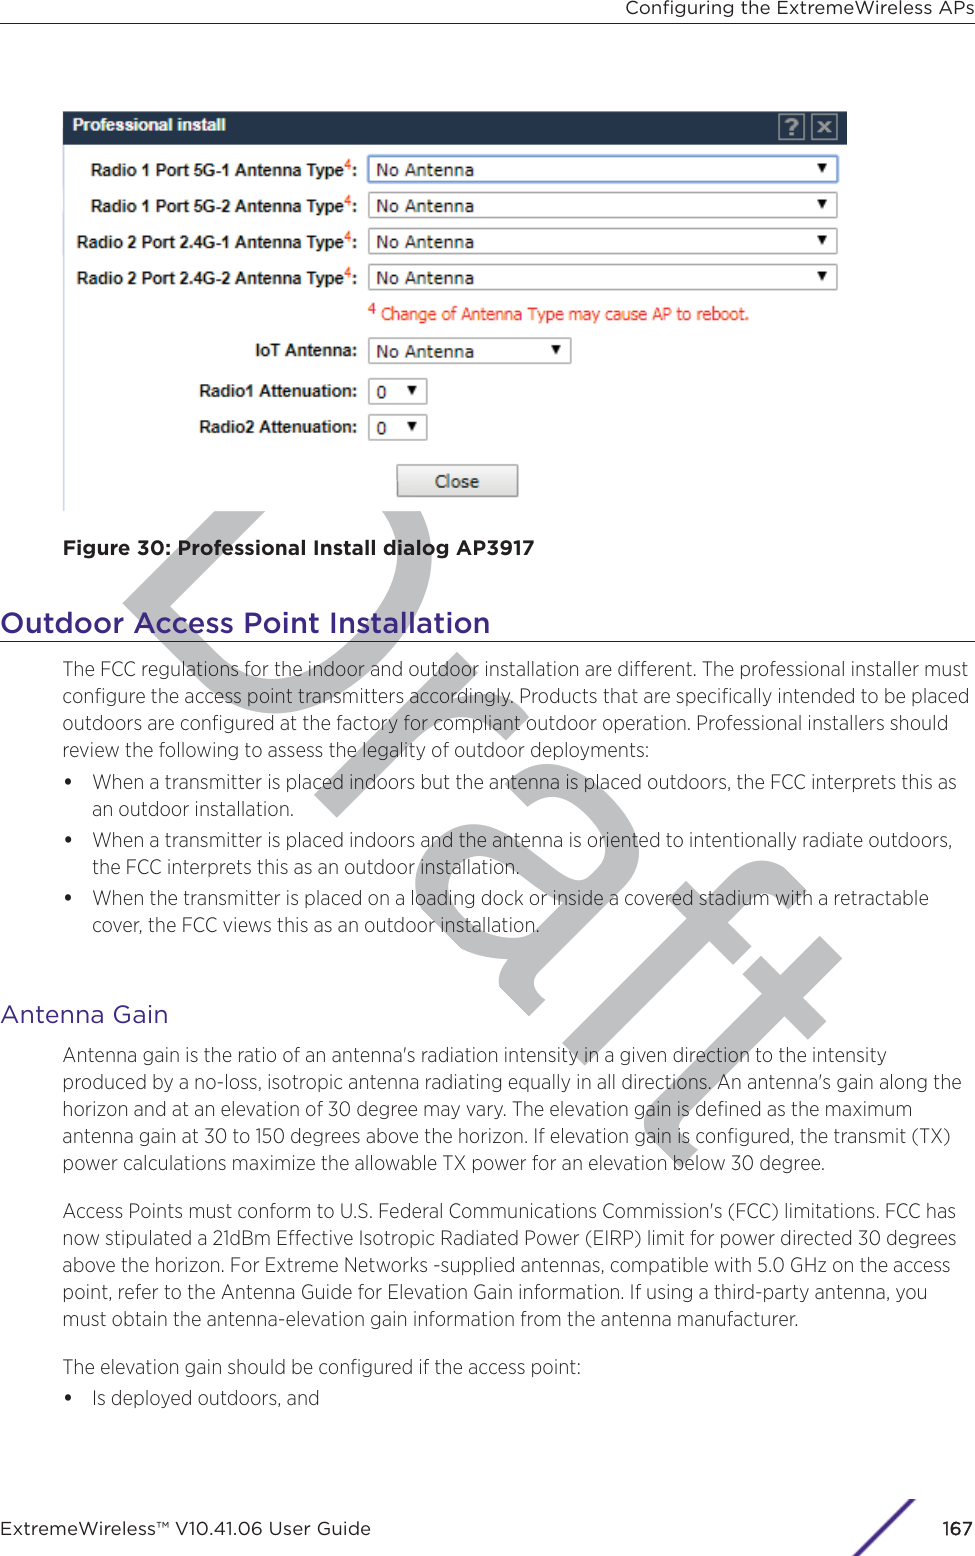 DraftFigure 30: Professional Install dialog AP3917Outdoor Access Point InstallationThe FCC regulations for the indoor and outdoor installation are dierent. The professional installer mustconﬁgure the access point transmitters accordingly. Products that are speciﬁcally intended to be placedoutdoors are conﬁgured at the factory for compliant outdoor operation. Professional installers shouldreview the following to assess the legality of outdoor deployments:•When a transmitter is placed indoors but the antenna is placed outdoors, the FCC interprets this asan outdoor installation.•When a transmitter is placed indoors and the antenna is oriented to intentionally radiate outdoors,the FCC interprets this as an outdoor installation.•When the transmitter is placed on a loading dock or inside a covered stadium with a retractablecover, the FCC views this as an outdoor installation.Antenna GainAntenna gain is the ratio of an antenna&apos;s radiation intensity in a given direction to the intensityproduced by a no-loss, isotropic antenna radiating equally in all directions. An antenna&apos;s gain along thehorizon and at an elevation of 30 degree may vary. The elevation gain is deﬁned as the maximumantenna gain at 30 to 150 degrees above the horizon. If elevation gain is conﬁgured, the transmit (TX)power calculations maximize the allowable TX power for an elevation below 30 degree.Access Points must conform to U.S. Federal Communications Commission&apos;s (FCC) limitations. FCC hasnow stipulated a 21dBm Eective Isotropic Radiated Power (EIRP) limit for power directed 30 degreesabove the horizon. For Extreme Networks -supplied antennas, compatible with 5.0 GHz on the accesspoint, refer to the Antenna Guide for Elevation Gain information. If using a third-party antenna, youmust obtain the antenna-elevation gain information from the antenna manufacturer.The elevation gain should be conﬁgured if the access point:•Is deployed outdoors, andConﬁguring the ExtremeWireless APsExtremeWireless™ V10.41.06 User Guide 1167